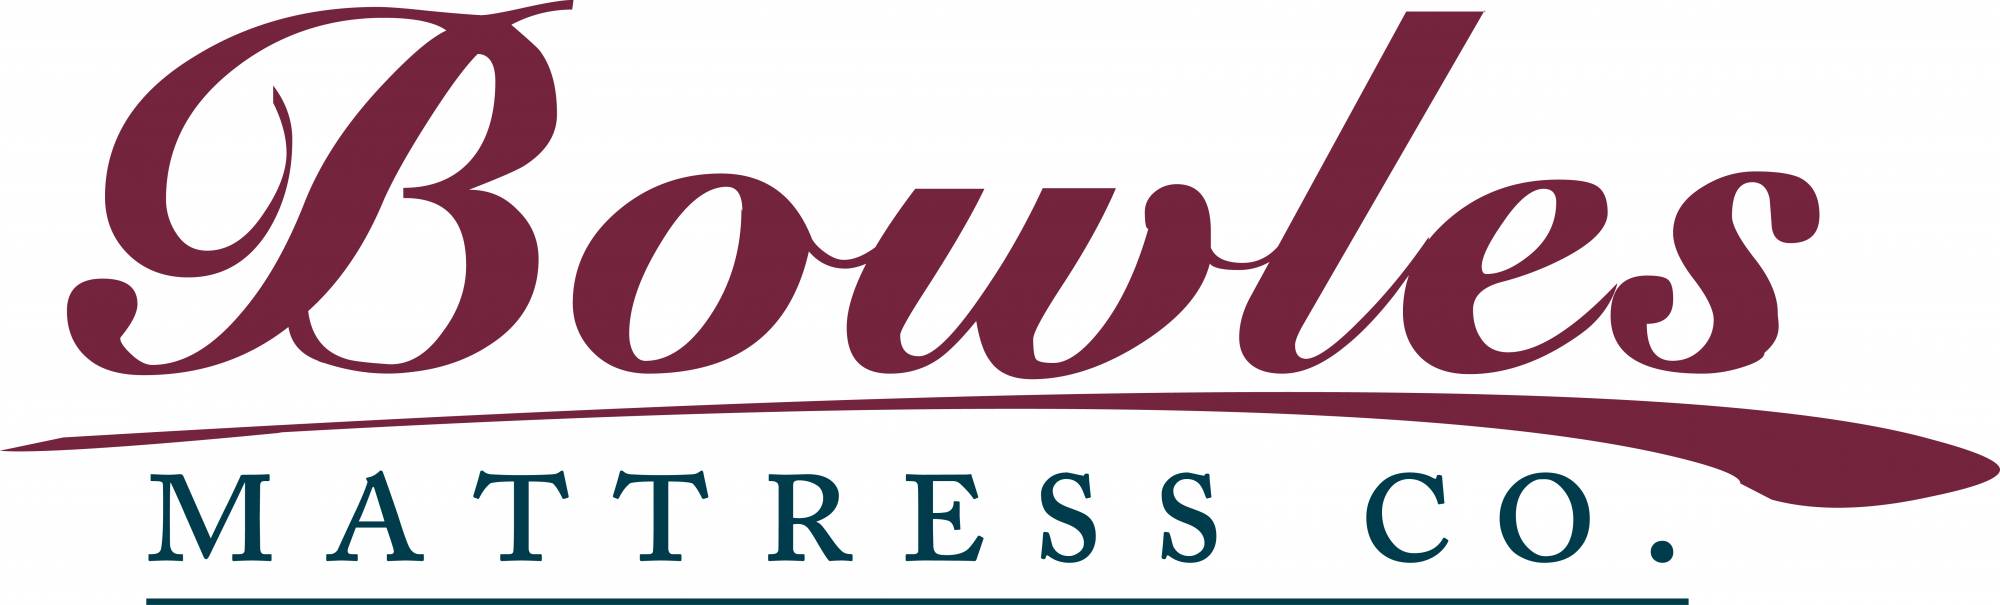 The wording Bowles Mattress Co appears in colorful script font. 